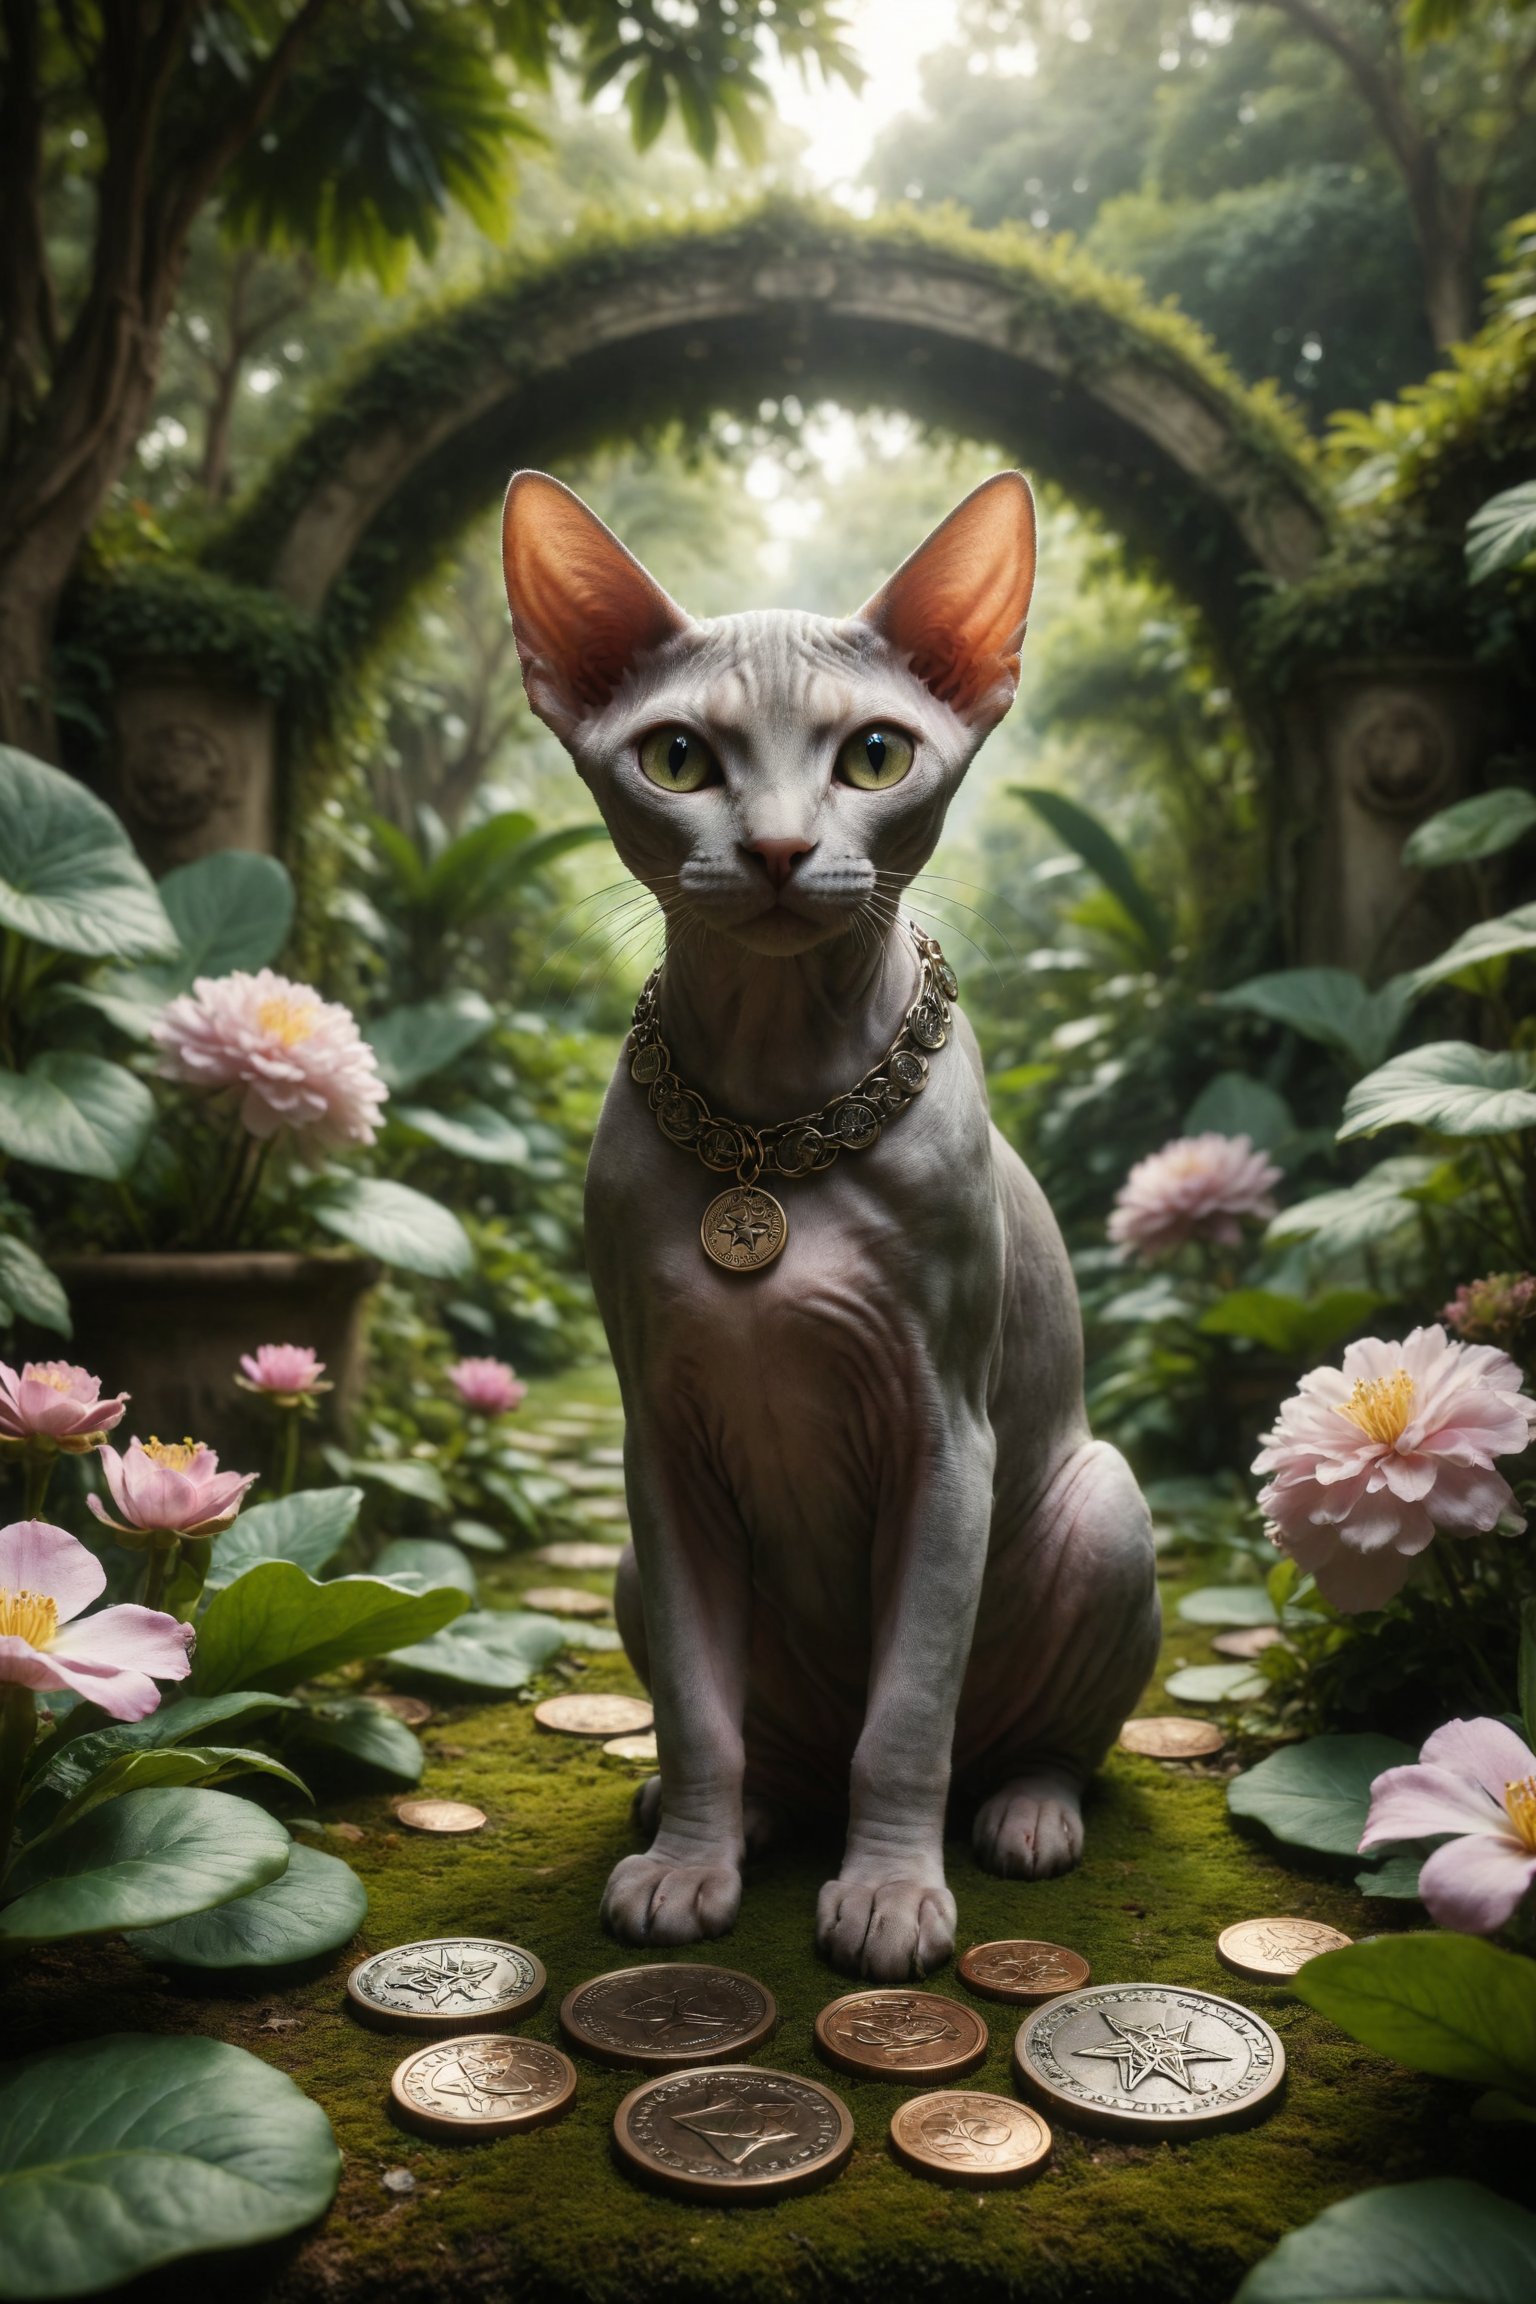 Generates an image of a Sphynx cat enjoying tranquility in a lush garden, surrounded by luxury and comfort, symbolizing security, abundance and the enjoyment of earthly pleasures, with 9 large coins with engraved pentacles